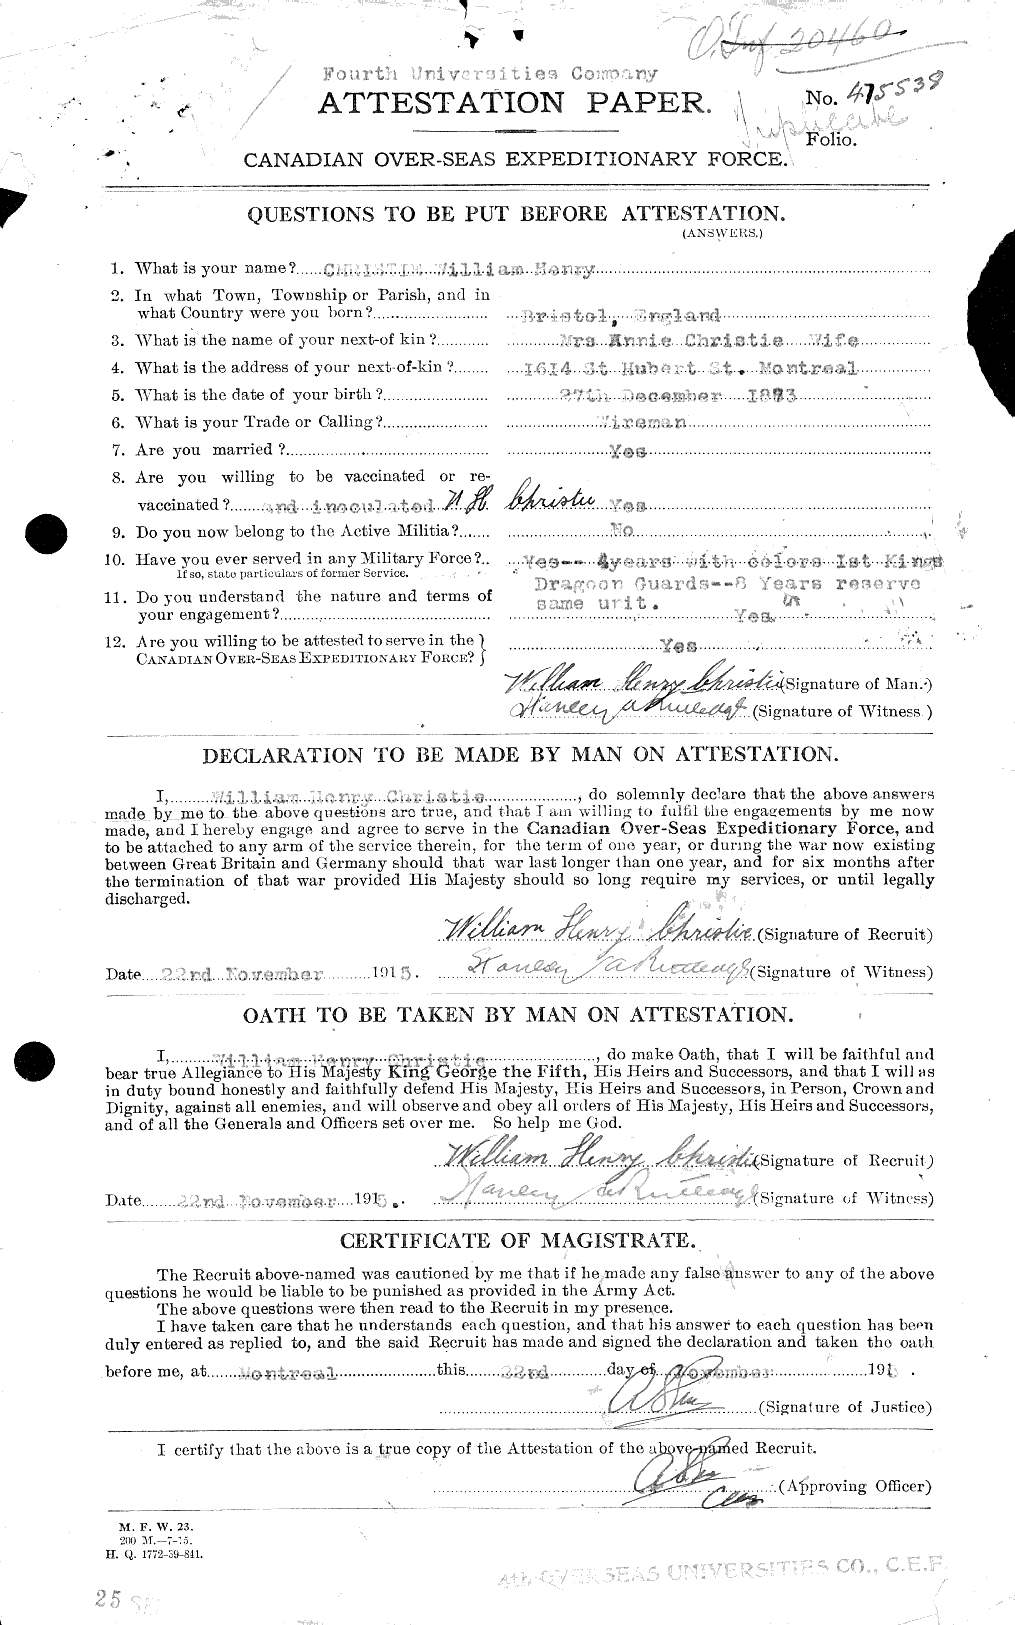 Personnel Records of the First World War - CEF 022098a